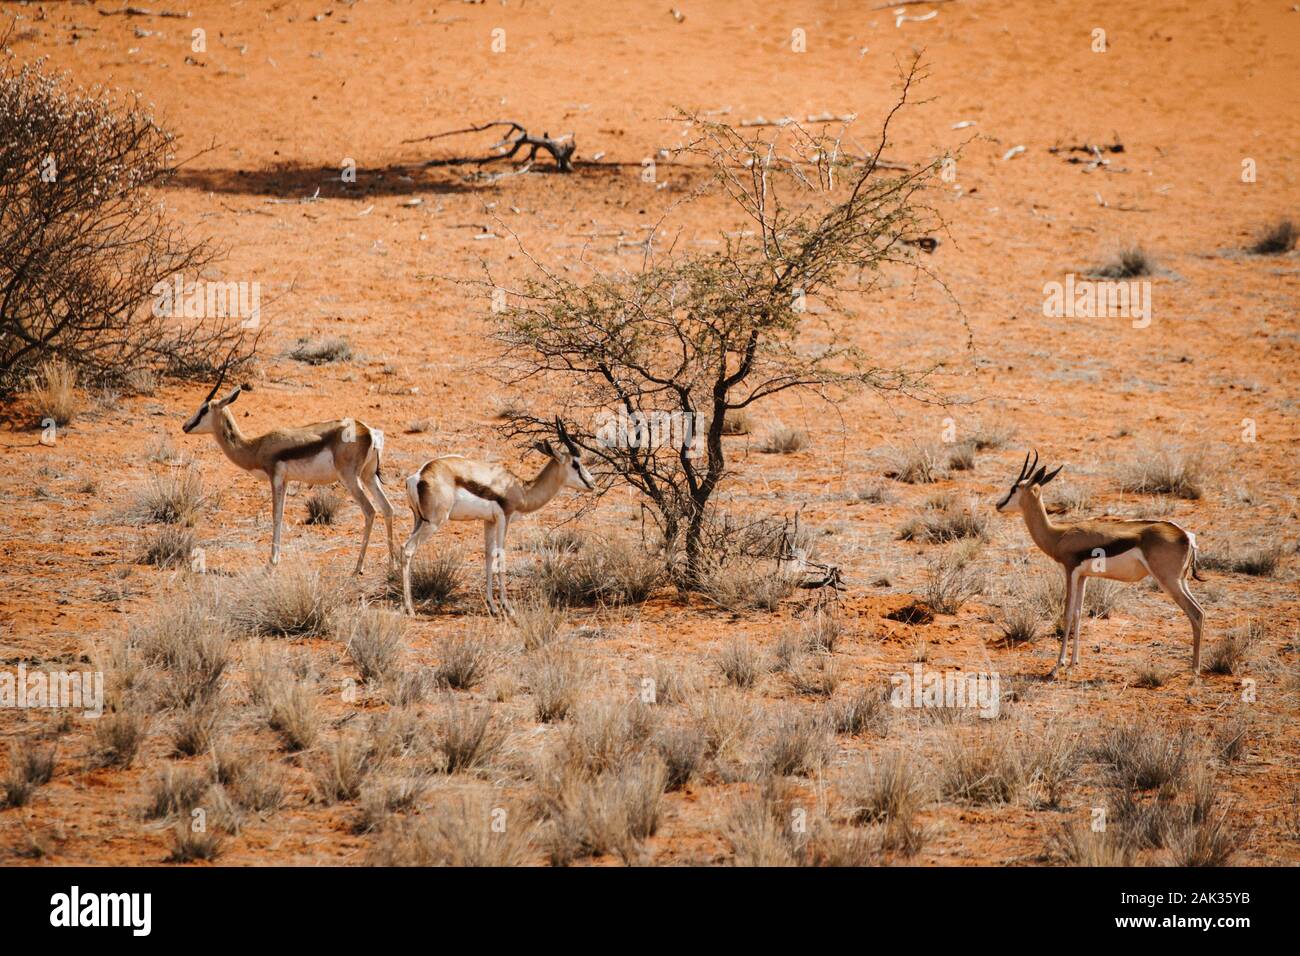 three gazelles standing in the desert with red sand Stock Photo